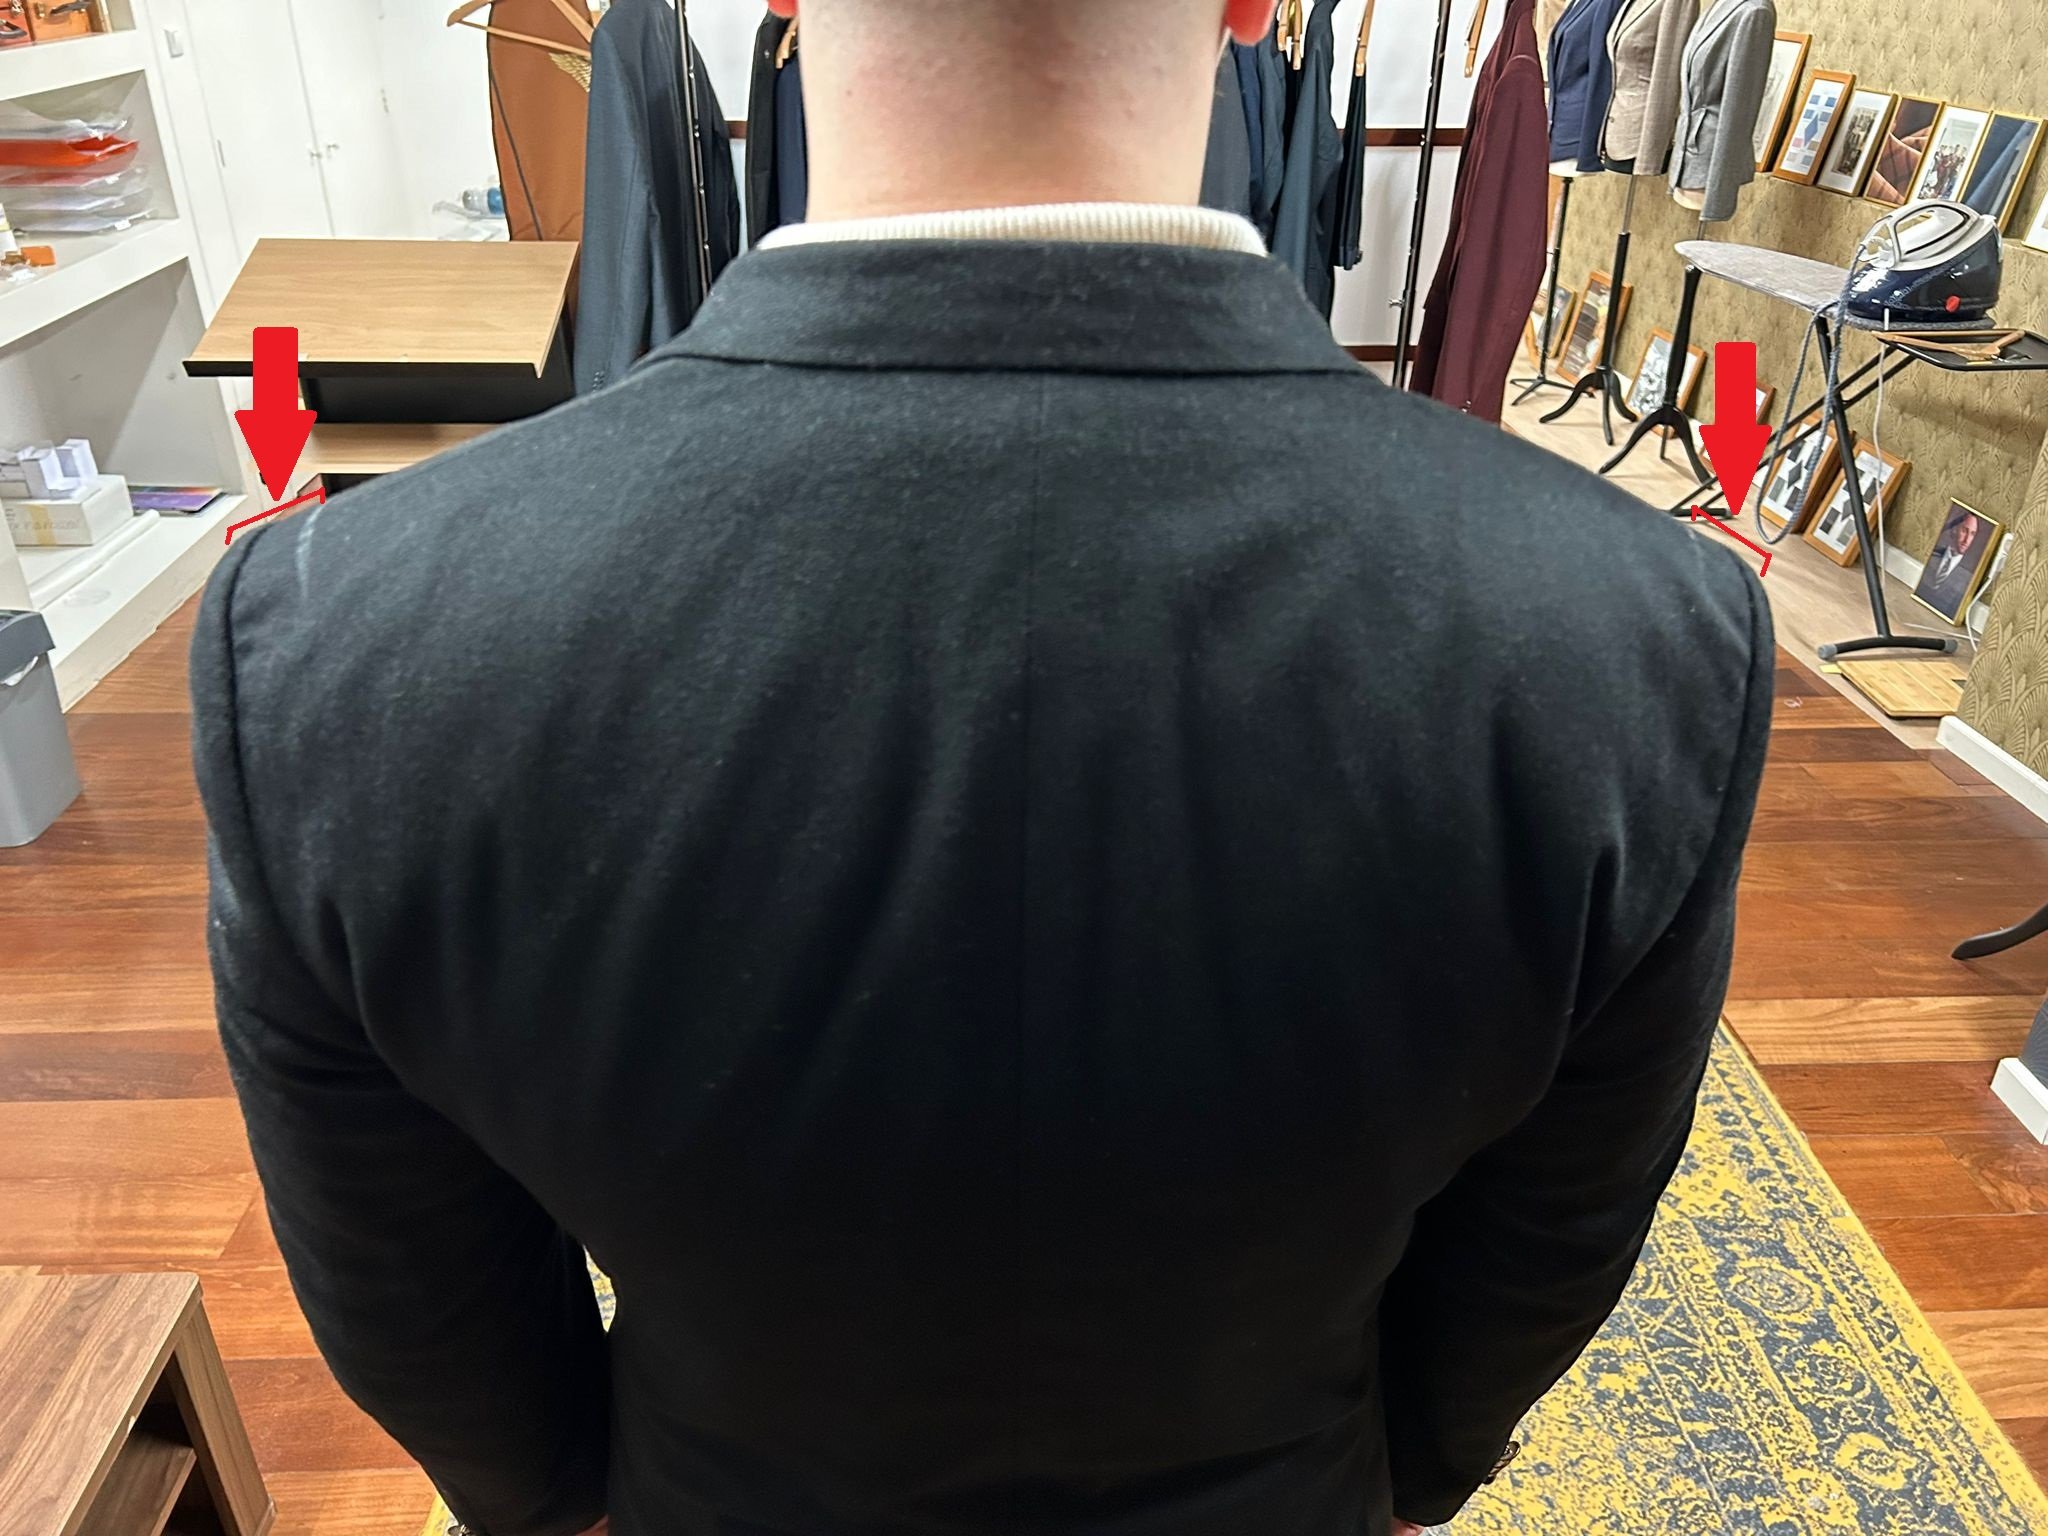 Shoulders (Suit) Jacket that are to broad and oversized before alterations, back view